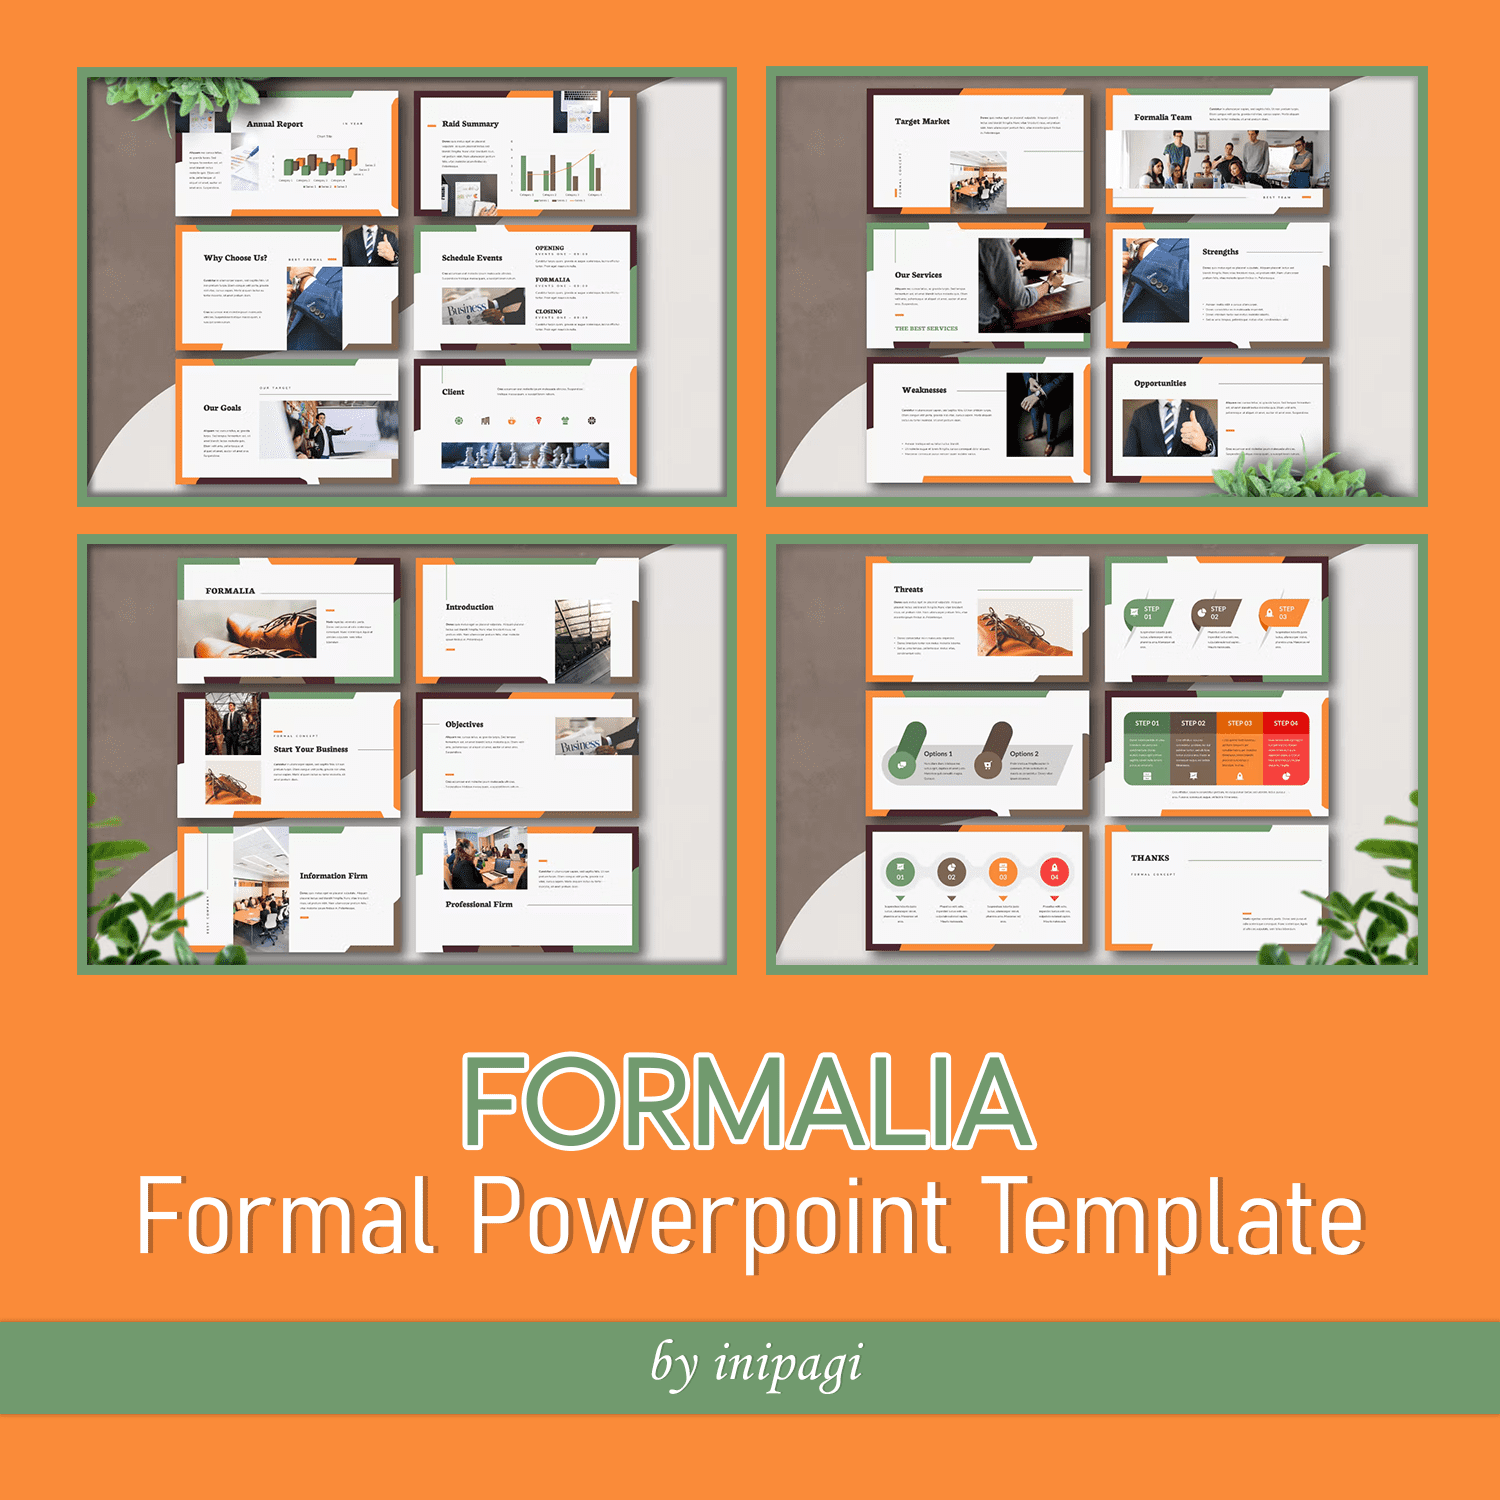 Formalia - Formal Powerpoint Template Cover.